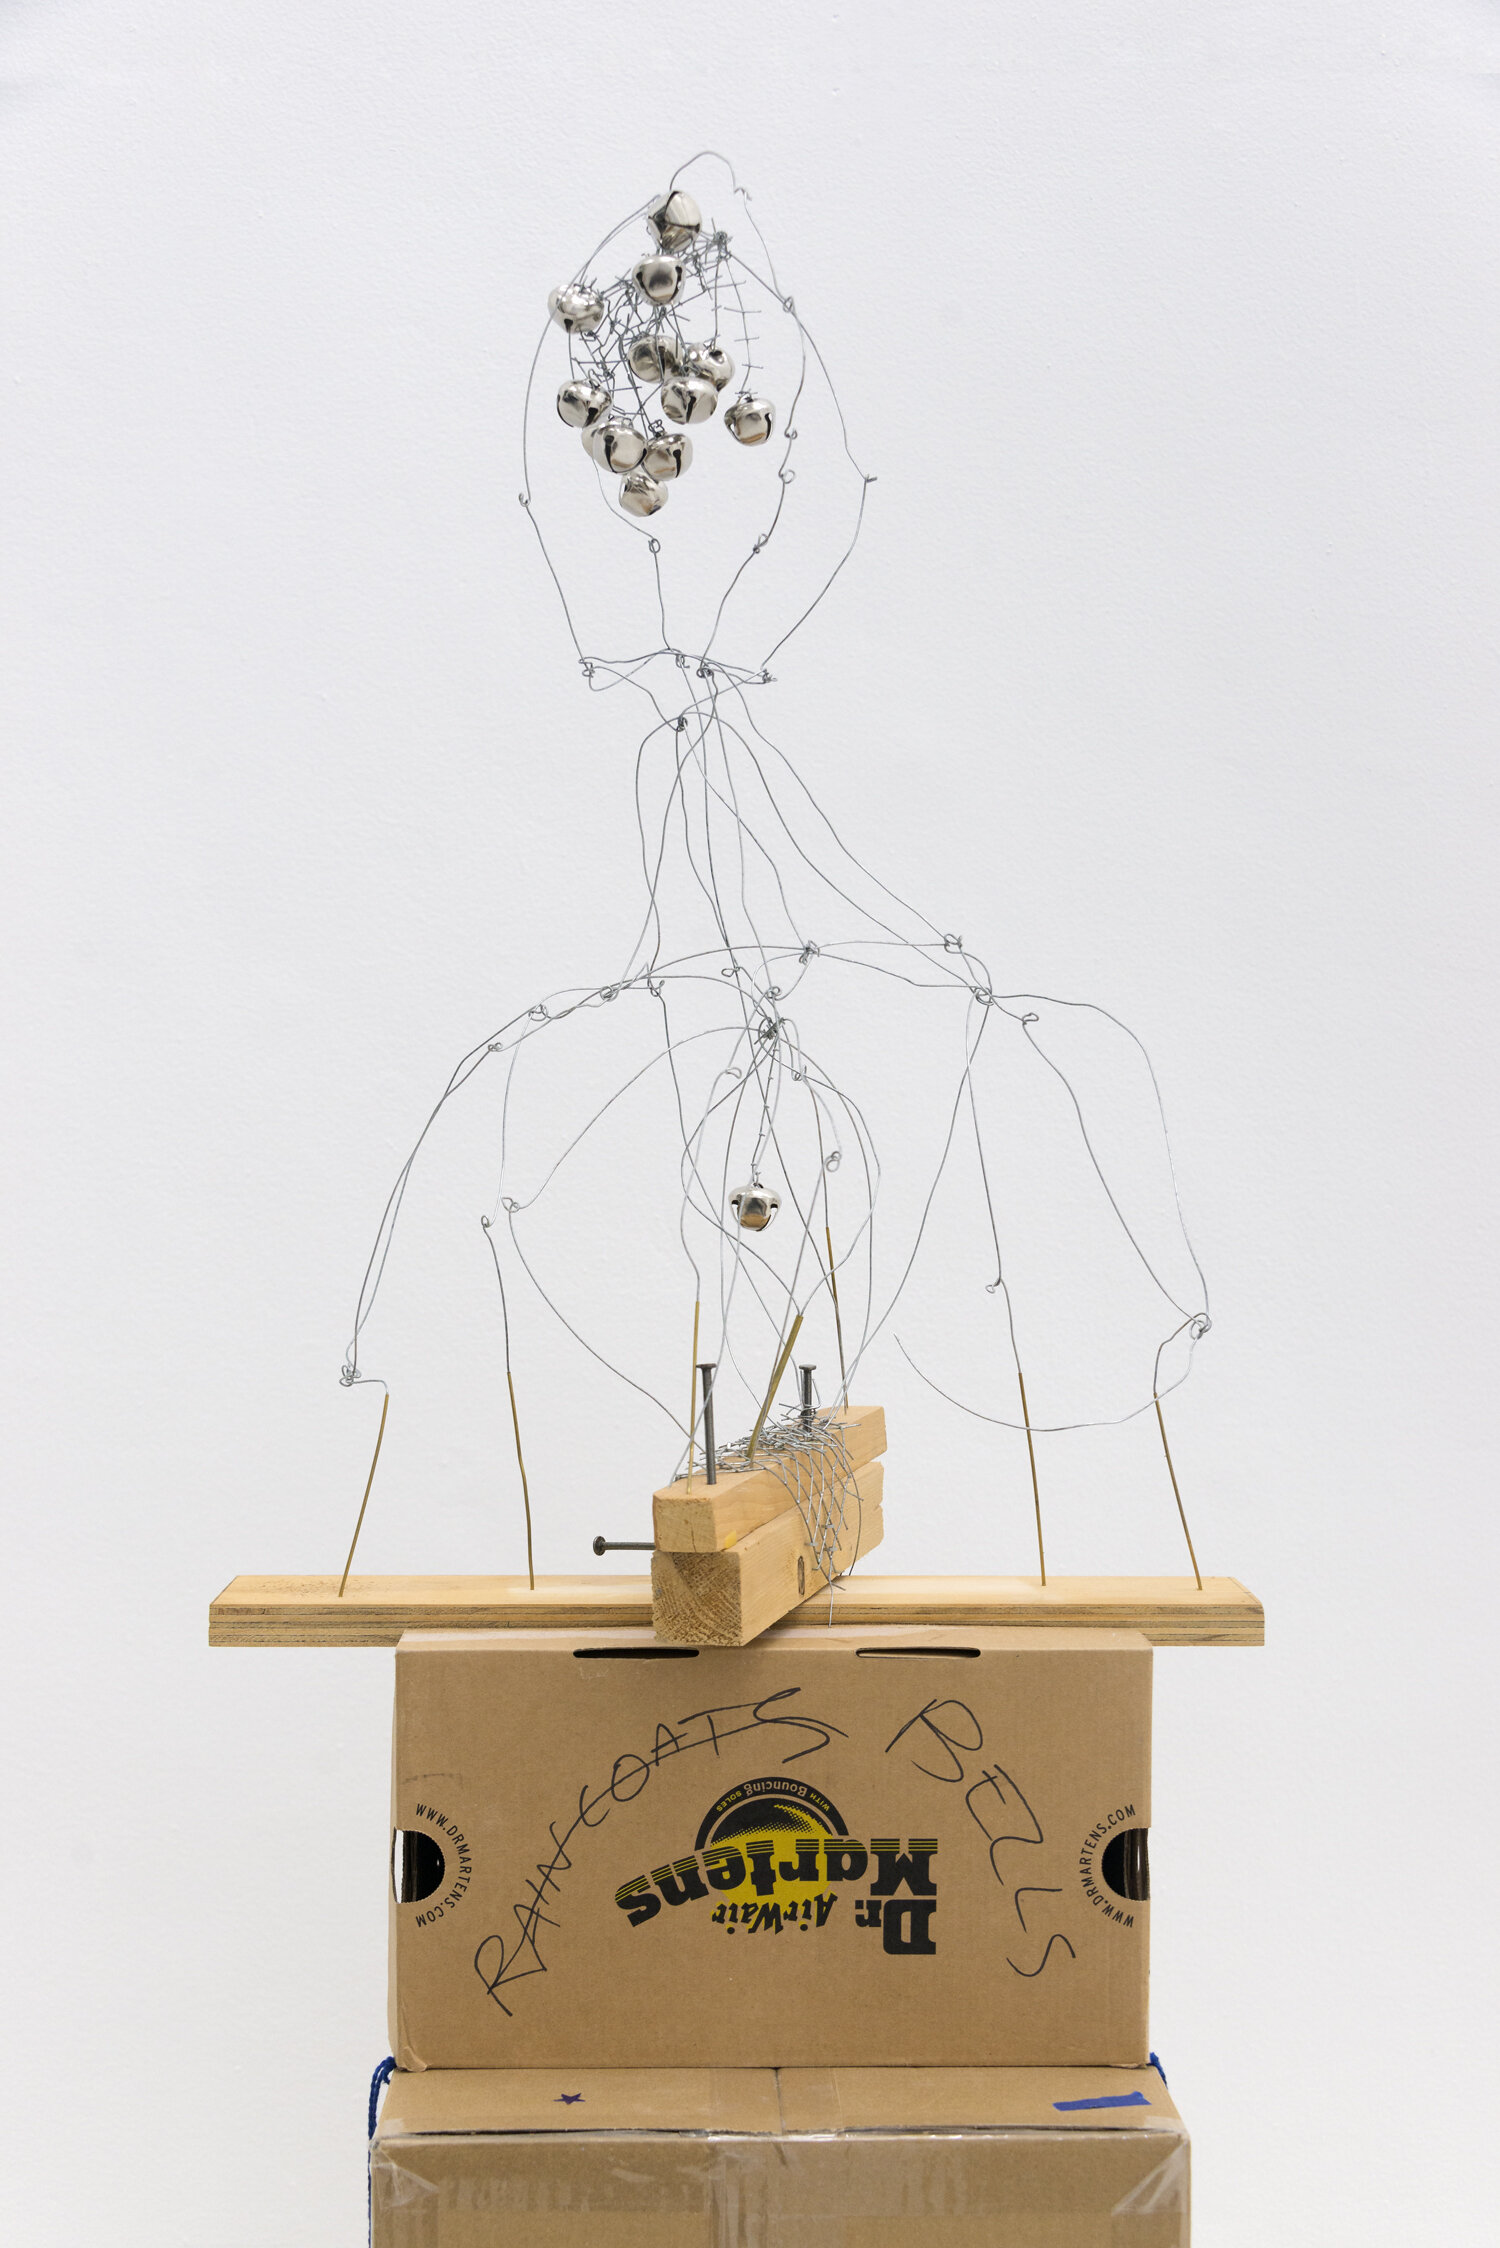   Lenore , 2019, Wood, metal pedestal: cardboard, cotton twine 72 x 21 x 12 in (bust only 24 x 17 x 11 in) 